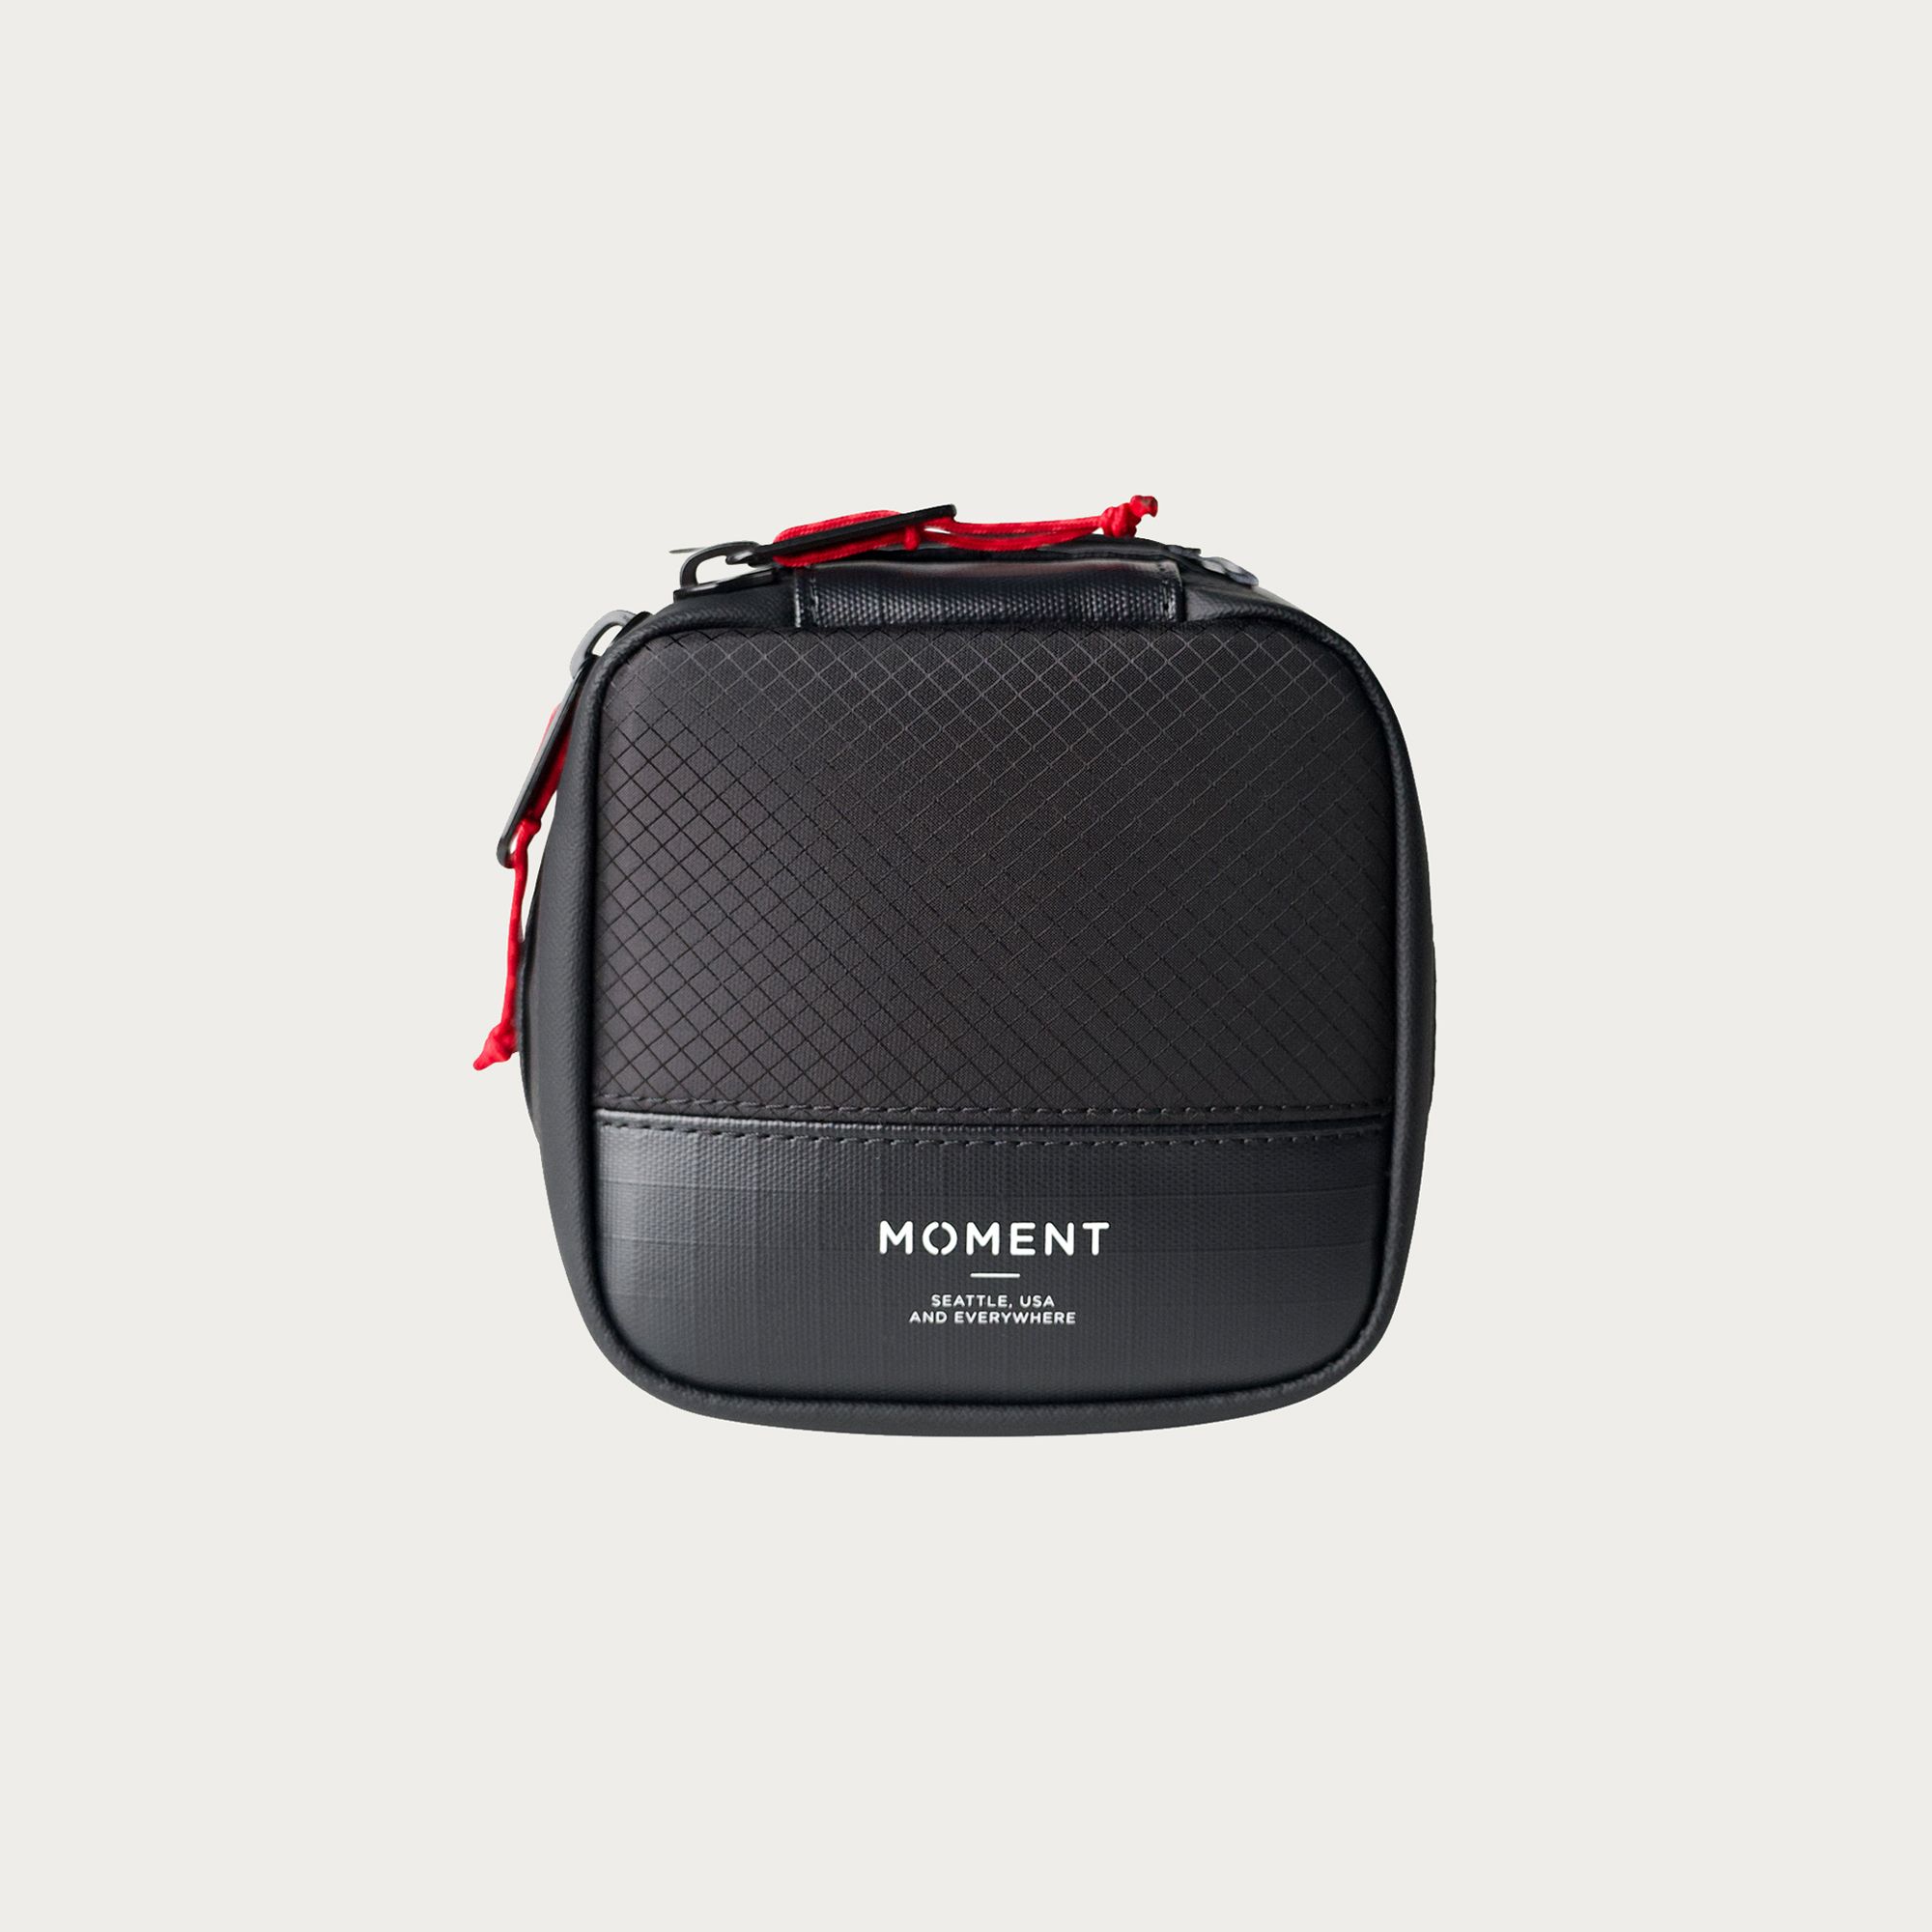 Moment Weatherproof Mobile Lens Carrying Case - 2 Lenses | Moment